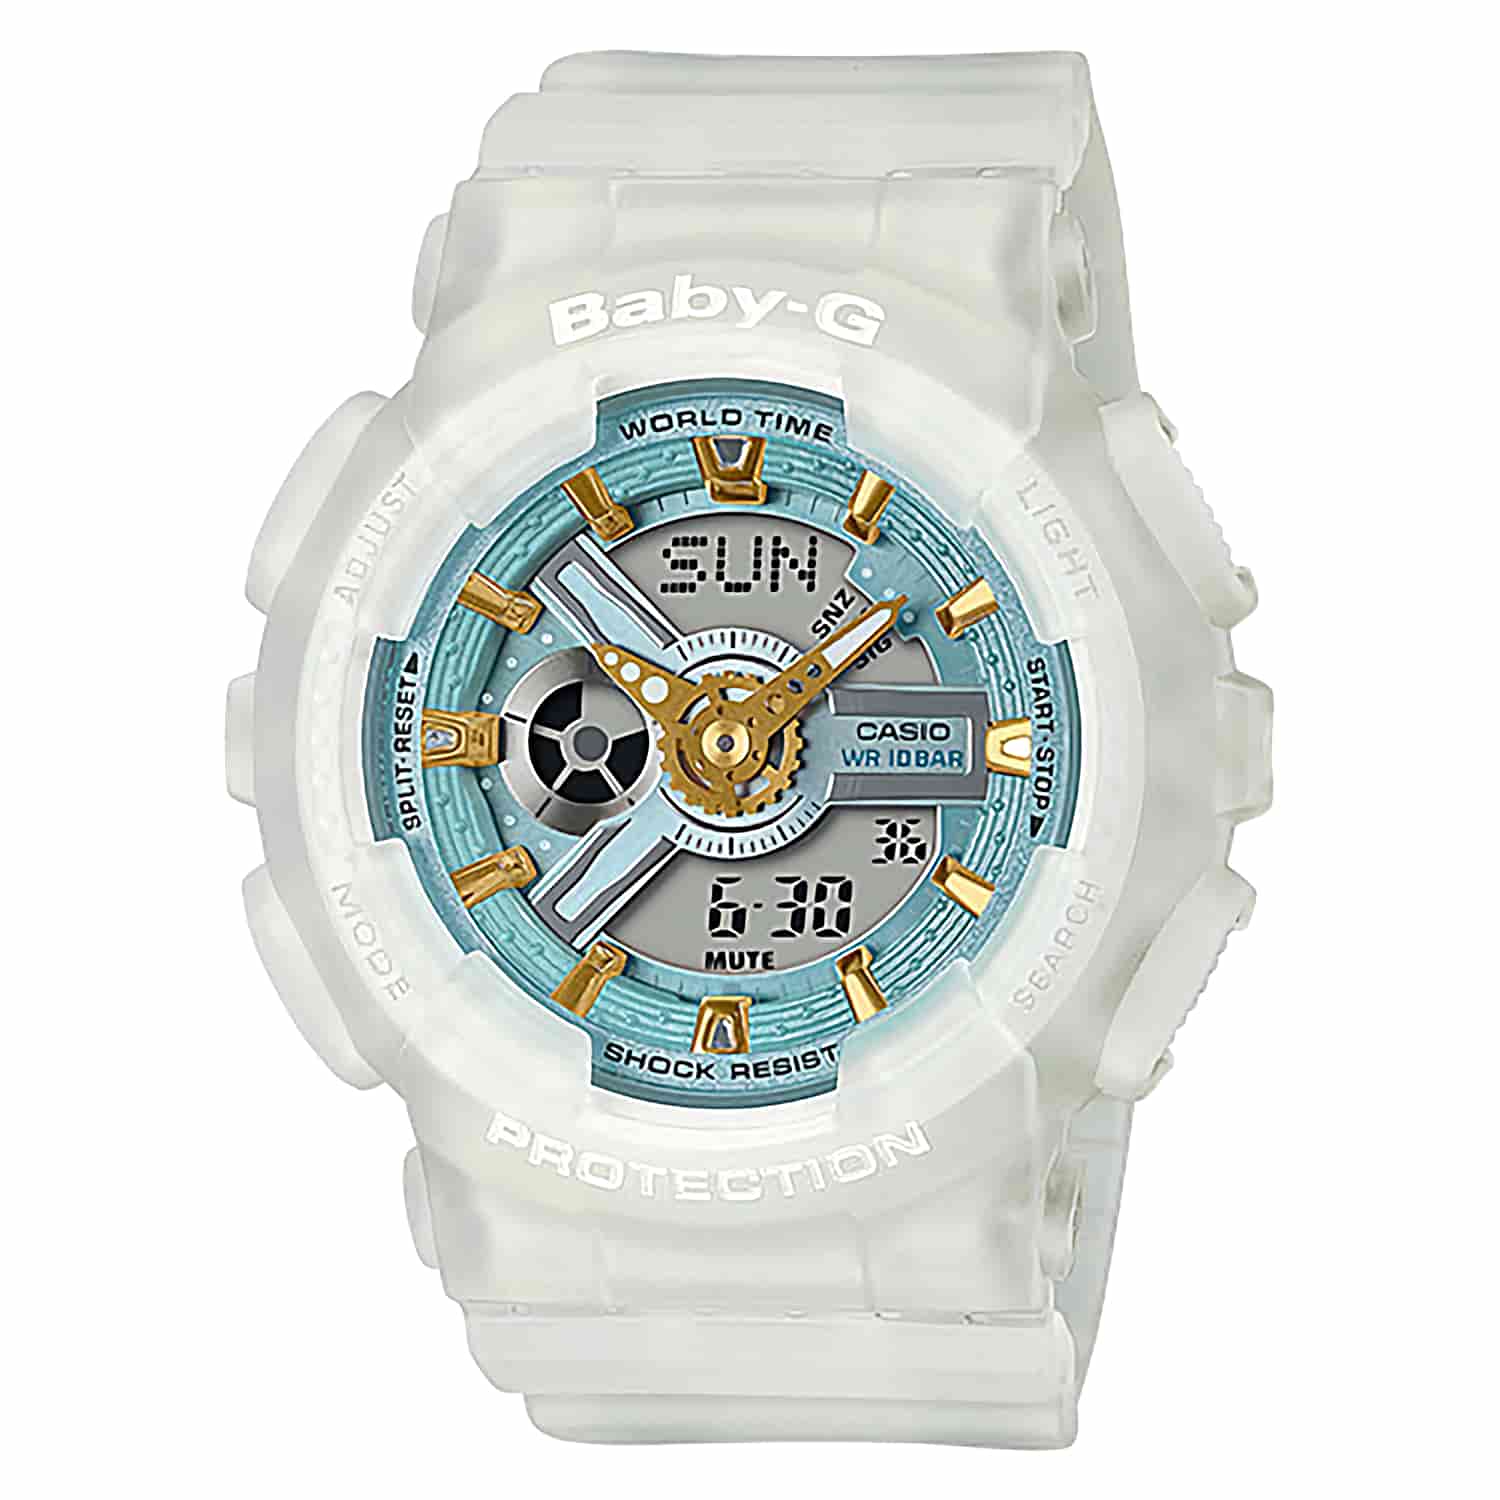 BA110SC-7A Casio BABY-G Special Colour Watch. From BABY-G, the casual watch for active women, come new models decorated with sea glass colours. Sea glass is natural frosted glass found on beaches along bodies of salt water, which takes decades to acquire 